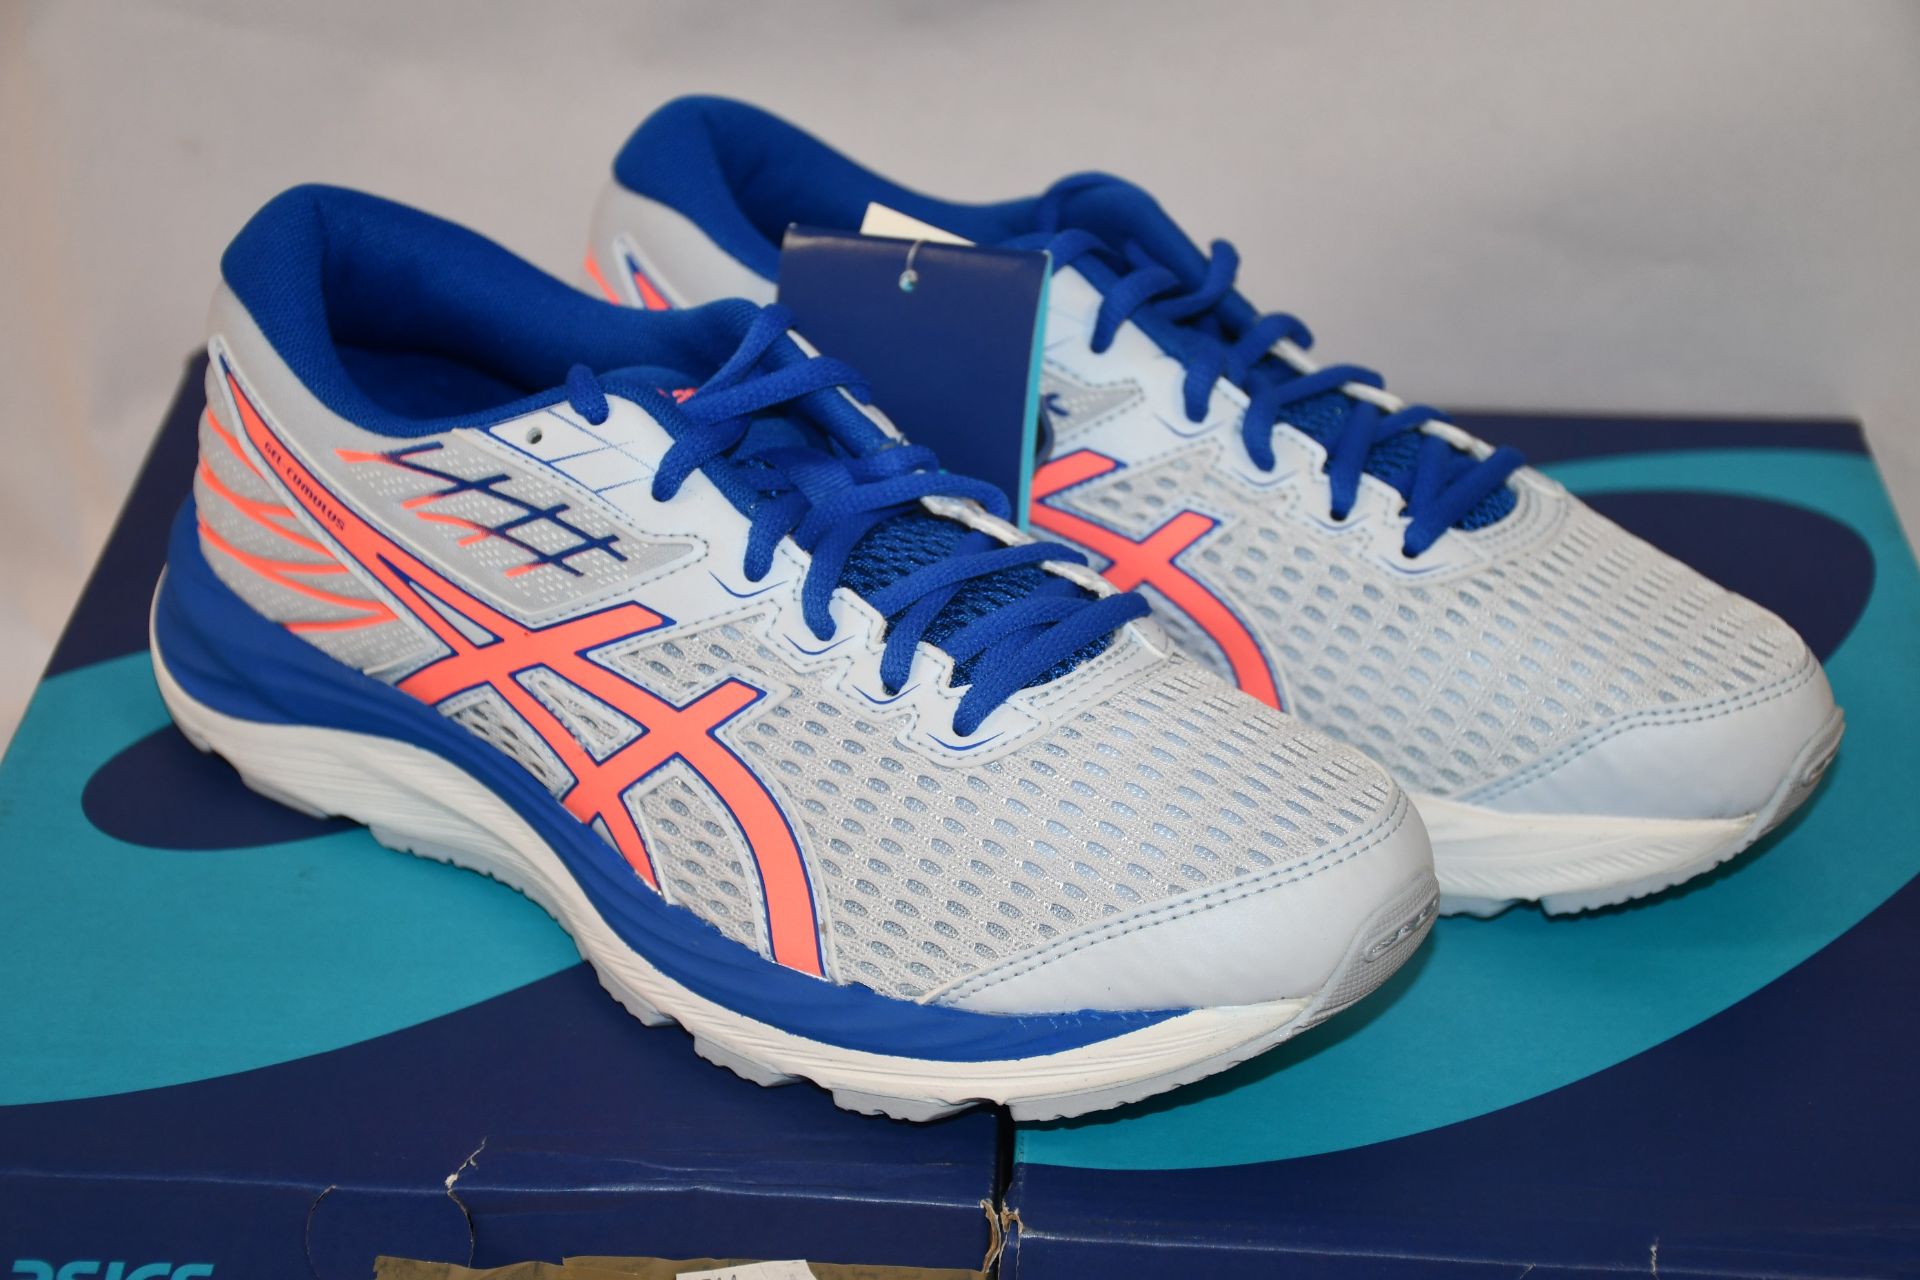 Two pairs of as new Asics Gel-Cumulus 21 GS trainers (Both UK 5.5).